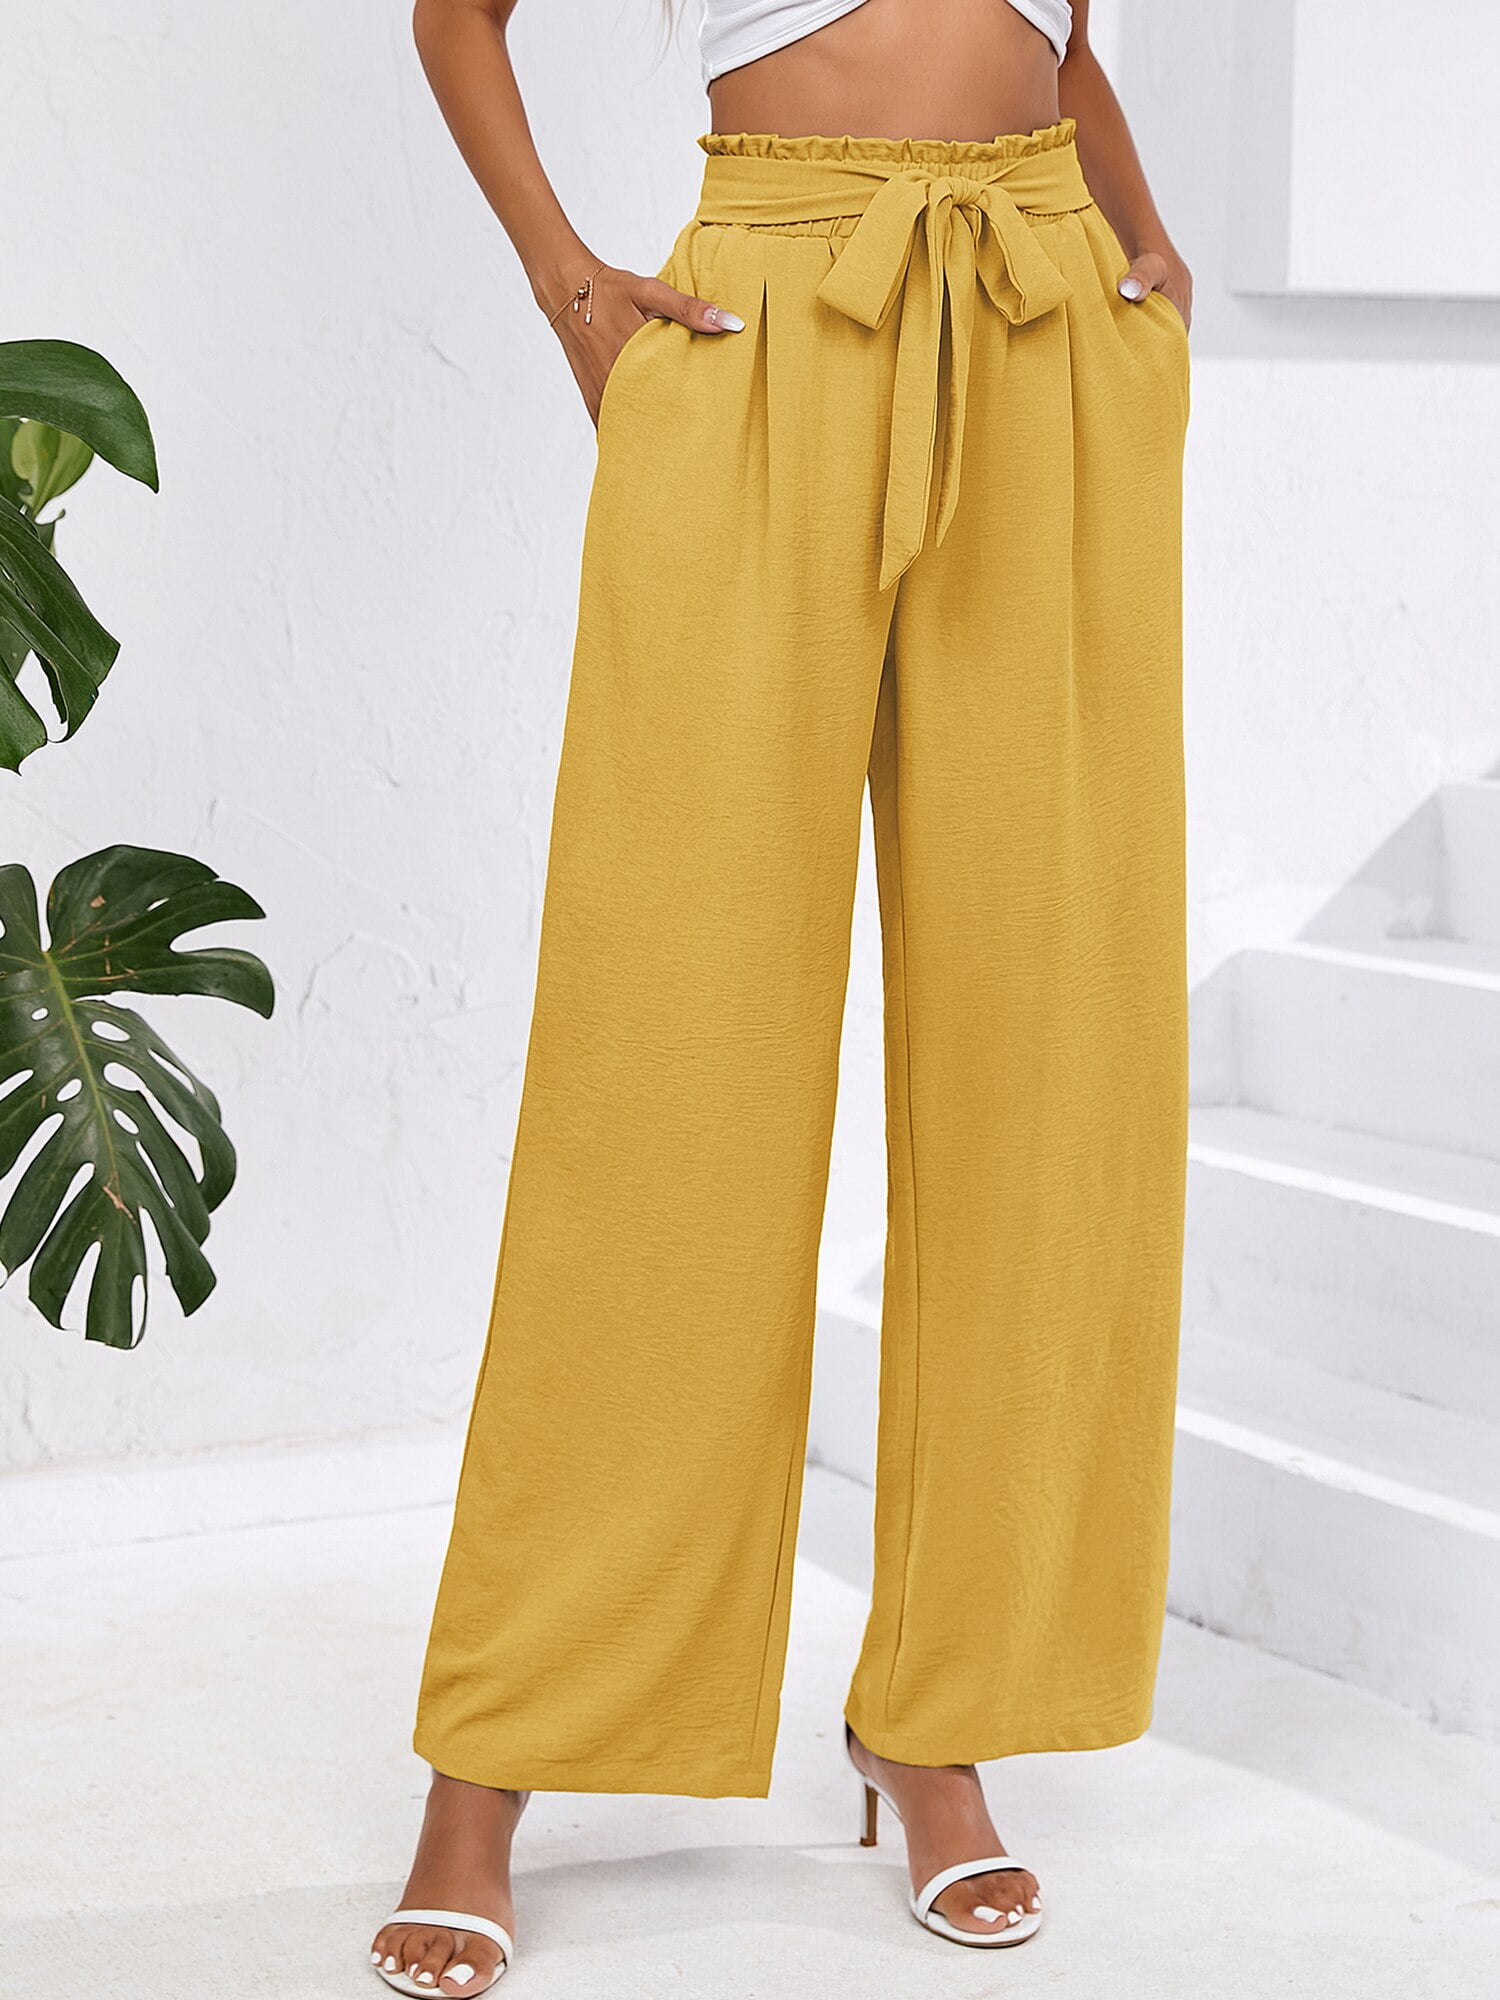 Chiclily Women's Wide Leg Pants with Pockets Lightweight High Waisted  Adjustable Tie Knot Loose Trousers Flowy Summer Beach Lounge Pants, US Size  Large in Yellow 